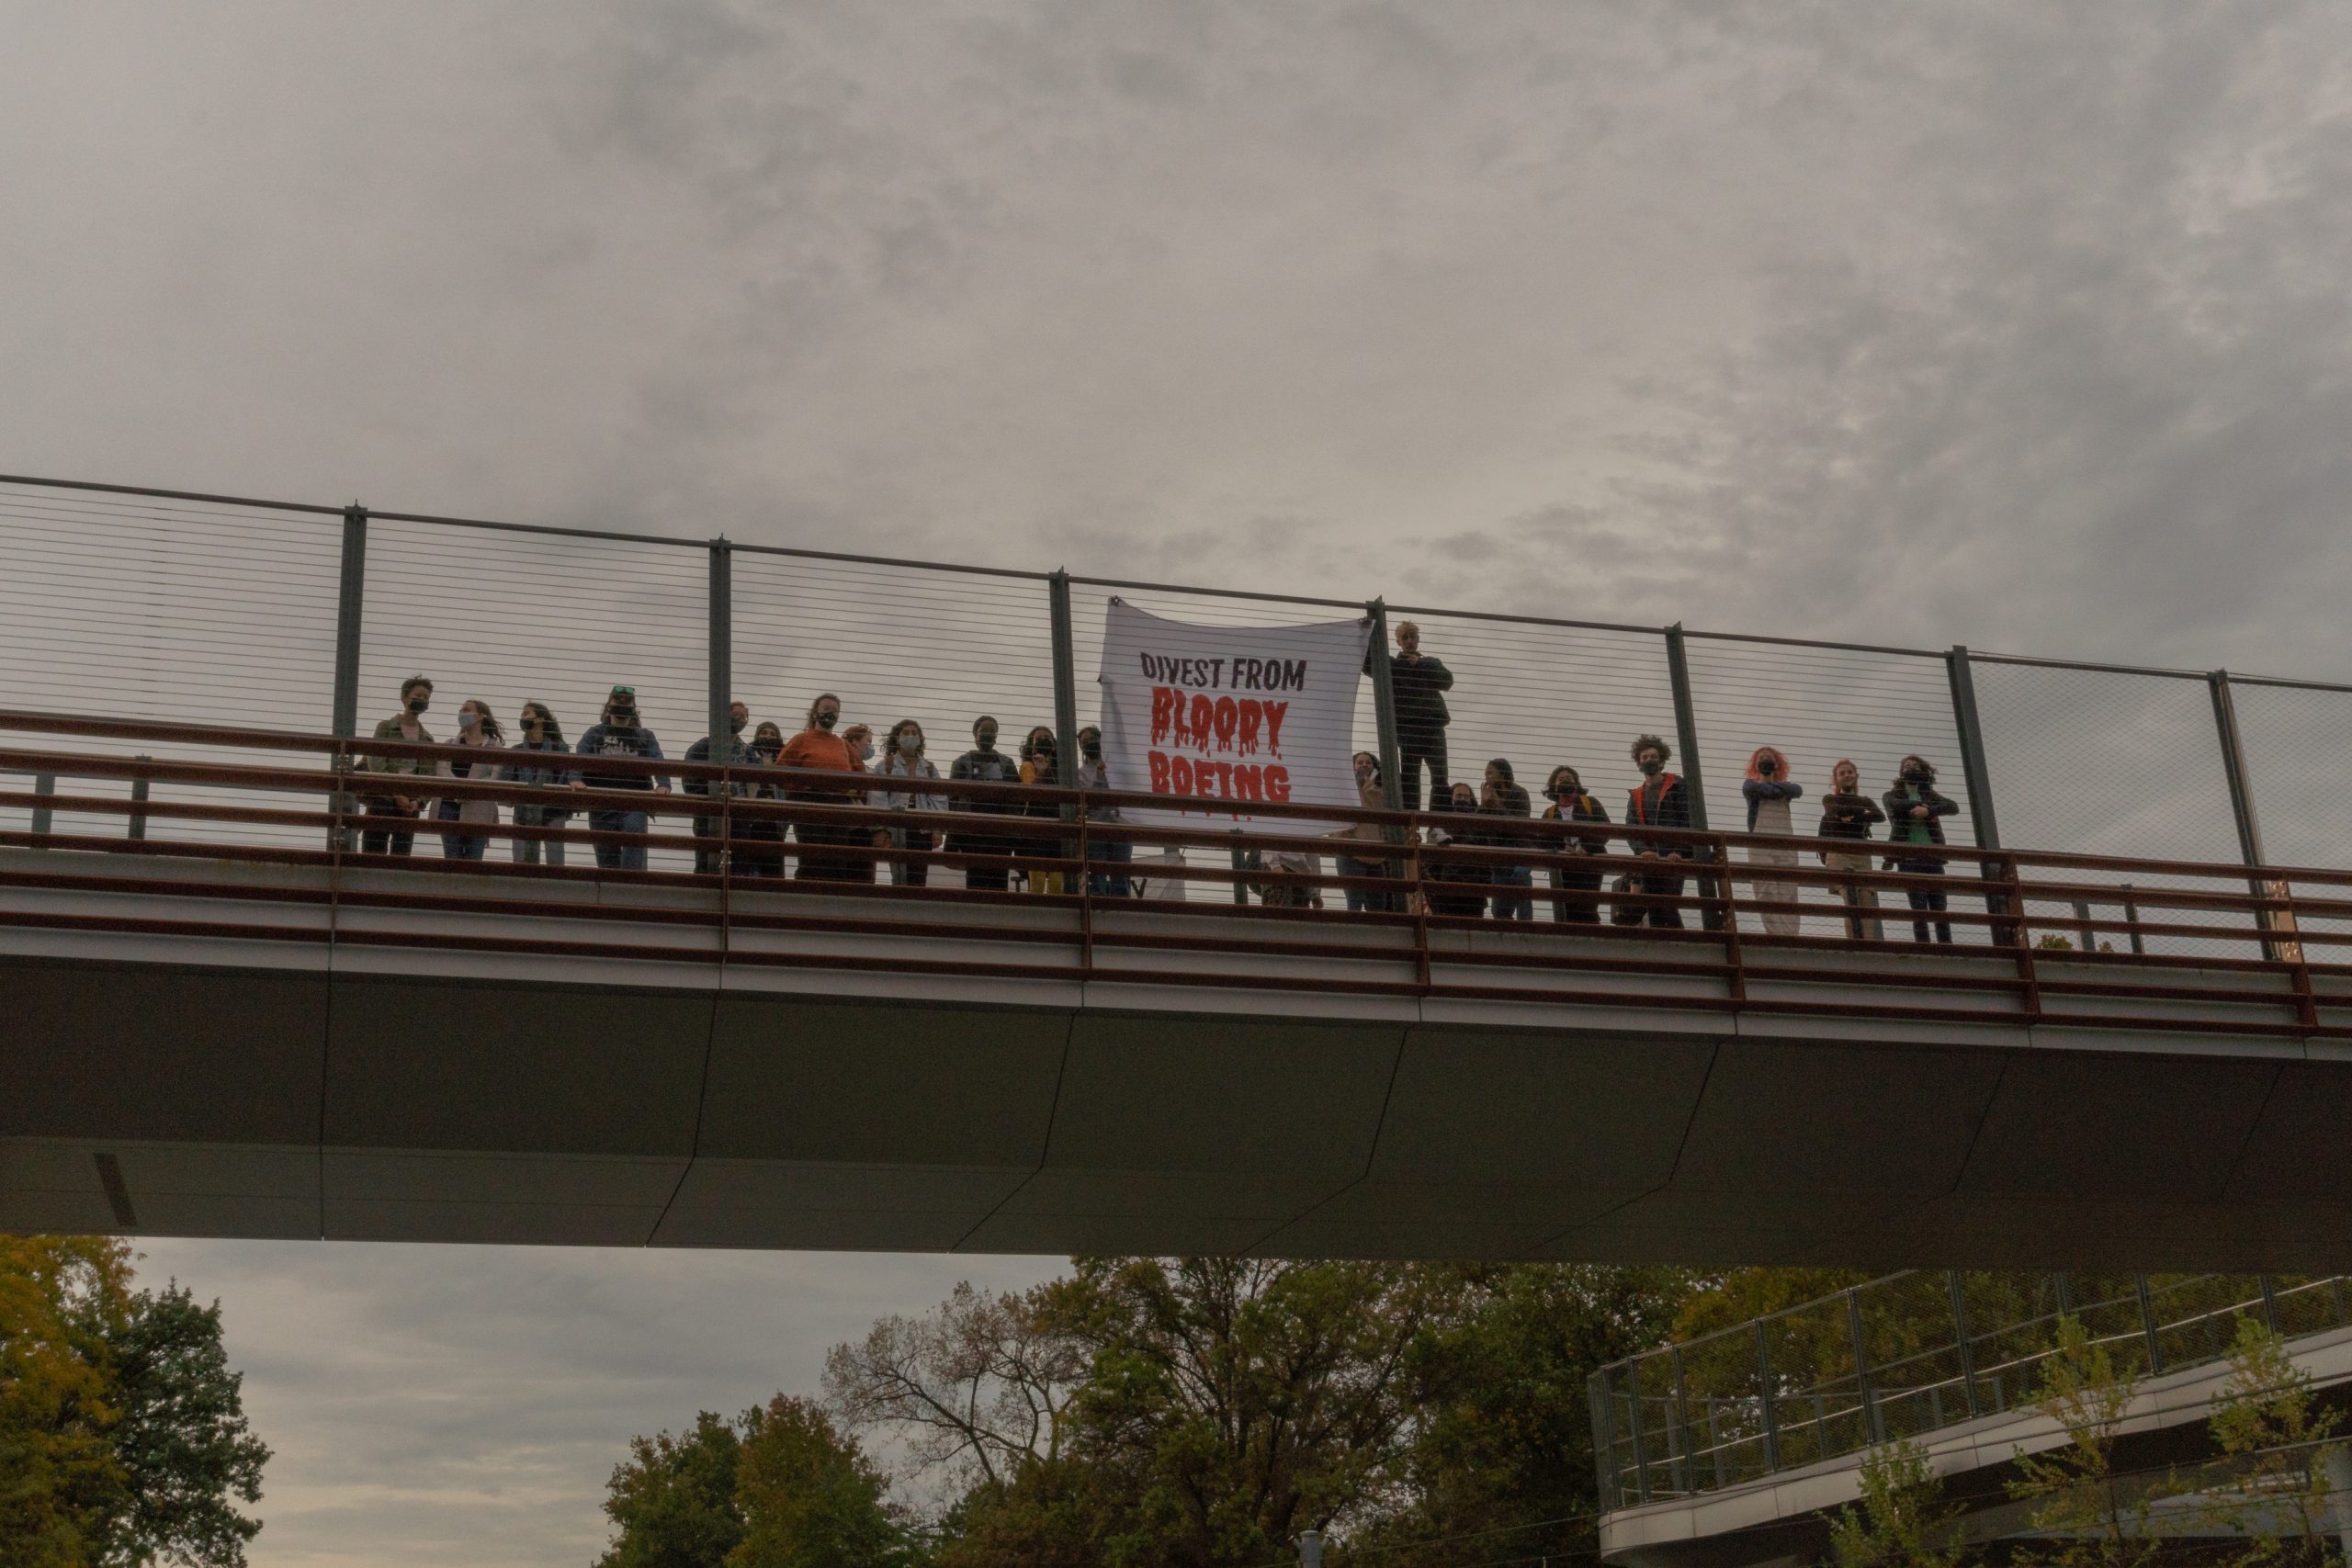 A crowd of people stand behind a chain-link fence on a walkway suspended in the air. A white sign with "divest from bloody Boeing" written in red with blood drops on the letters is held behind the fence.